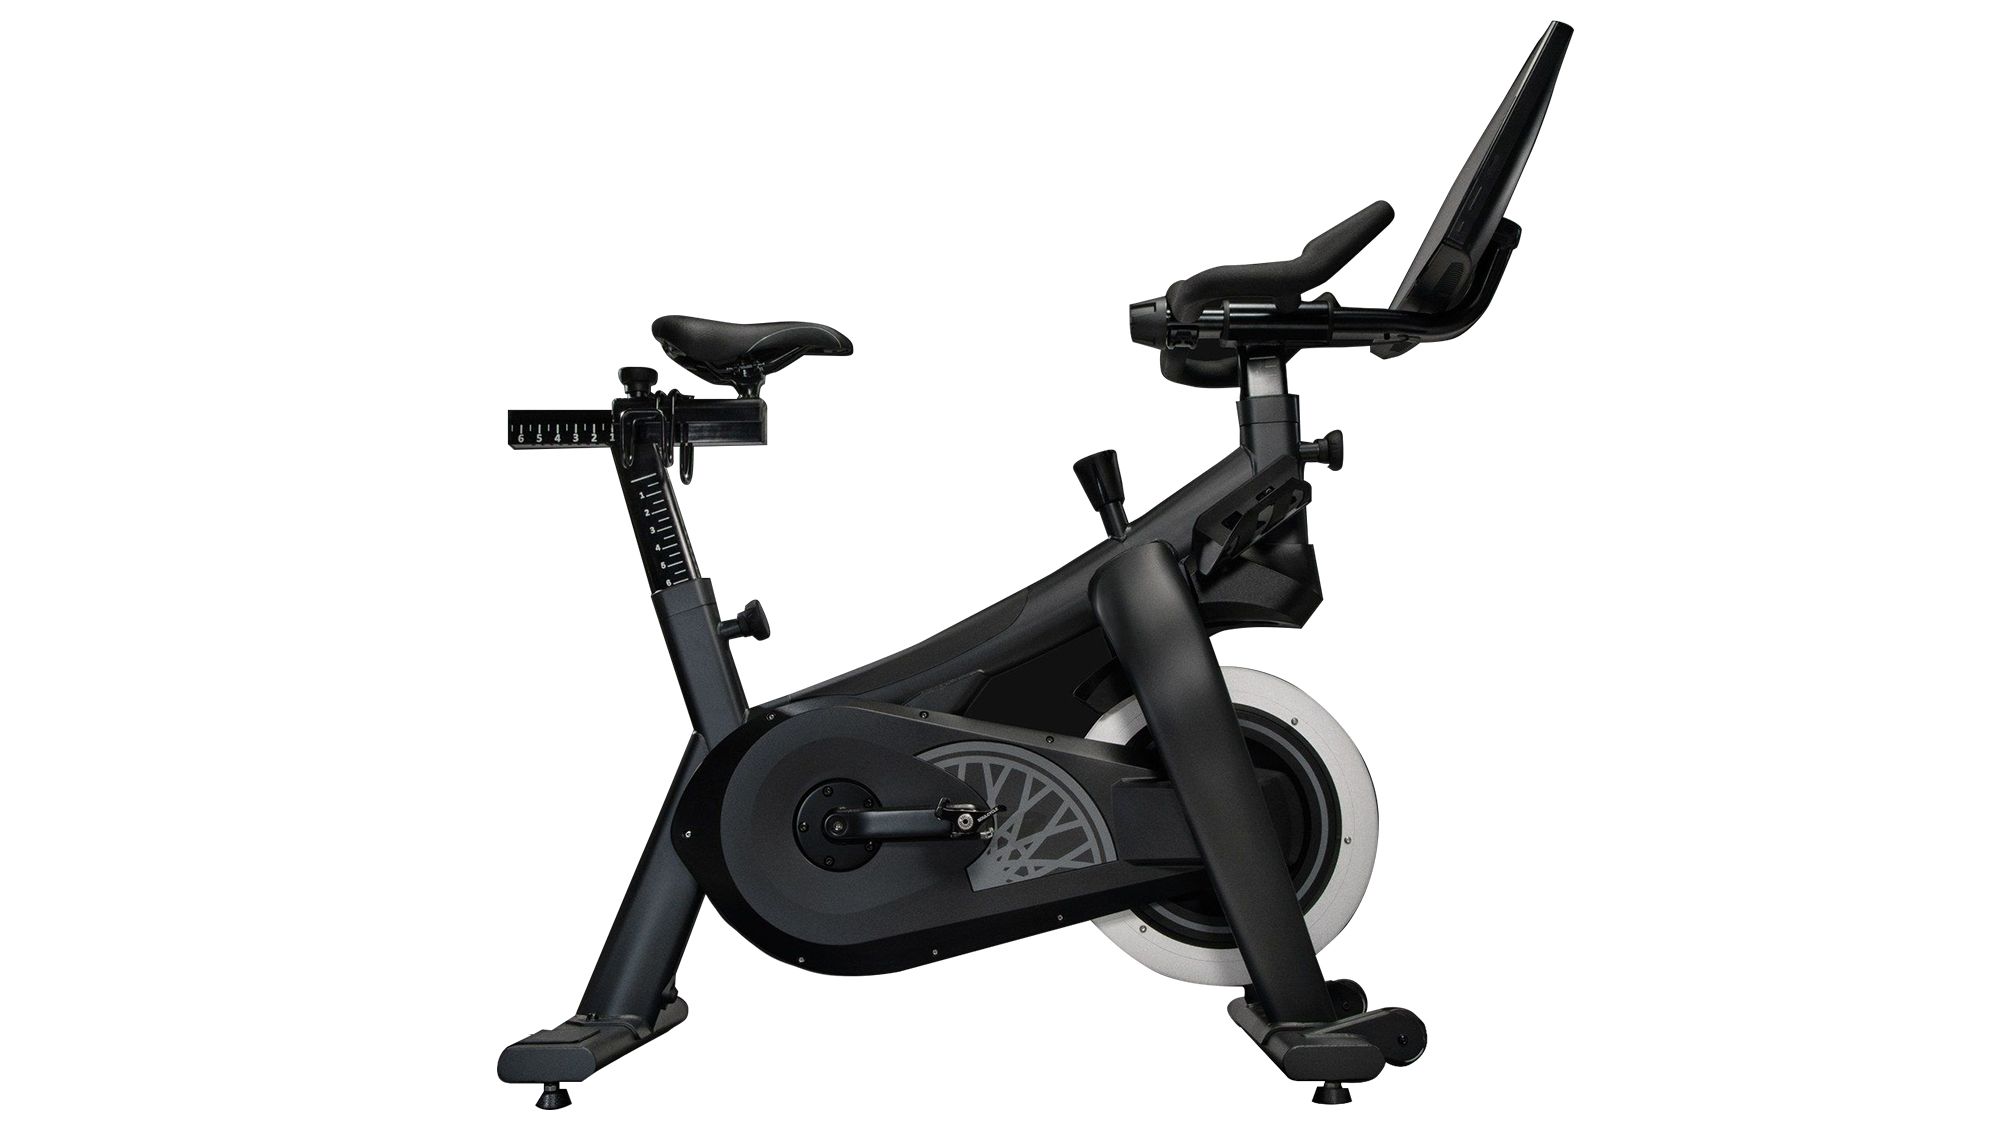 Exercise machine, Exercise equipment, Stationary bicycle, Indoor cycling, Exercise, Sports equipment, Bicycle accessory, Elliptical trainer, Vehicle, 